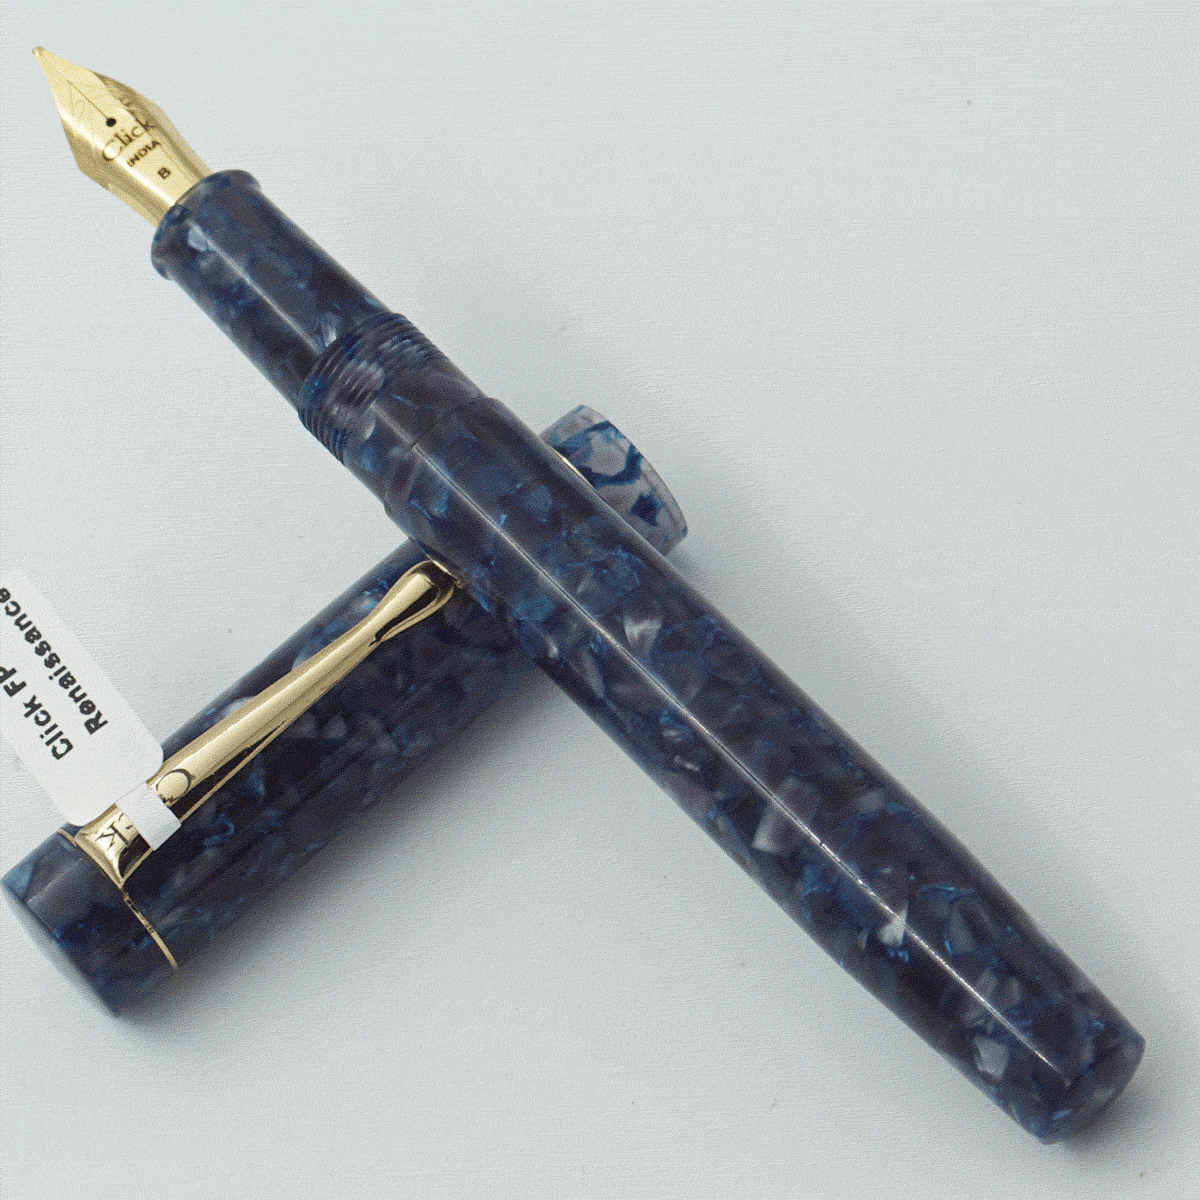 Click Renaissance Flashy Blue Color Marble Acrylic Body With Cap And Golden Clip No 35 SSF Broad Nib Eye Dropper Model Fountain Pen (3 in 1) (Nib Can be Customised) SKU 24046